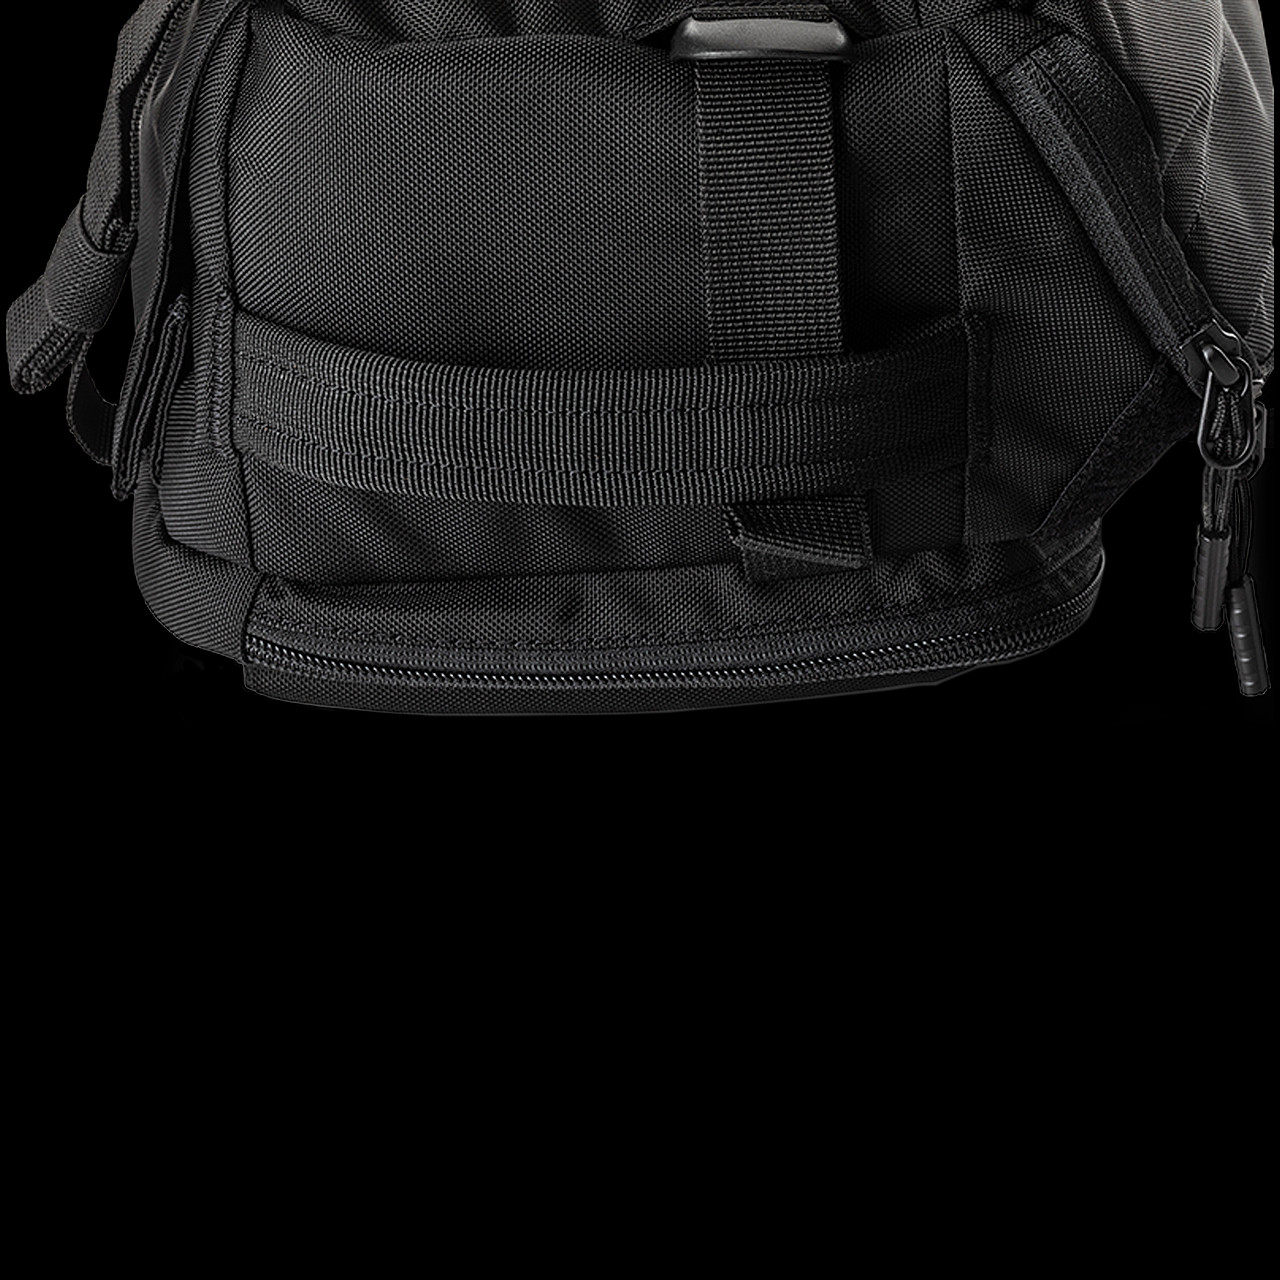 5.11 Tactical LV10 Sling Pack- Perfect grab and go bag? 